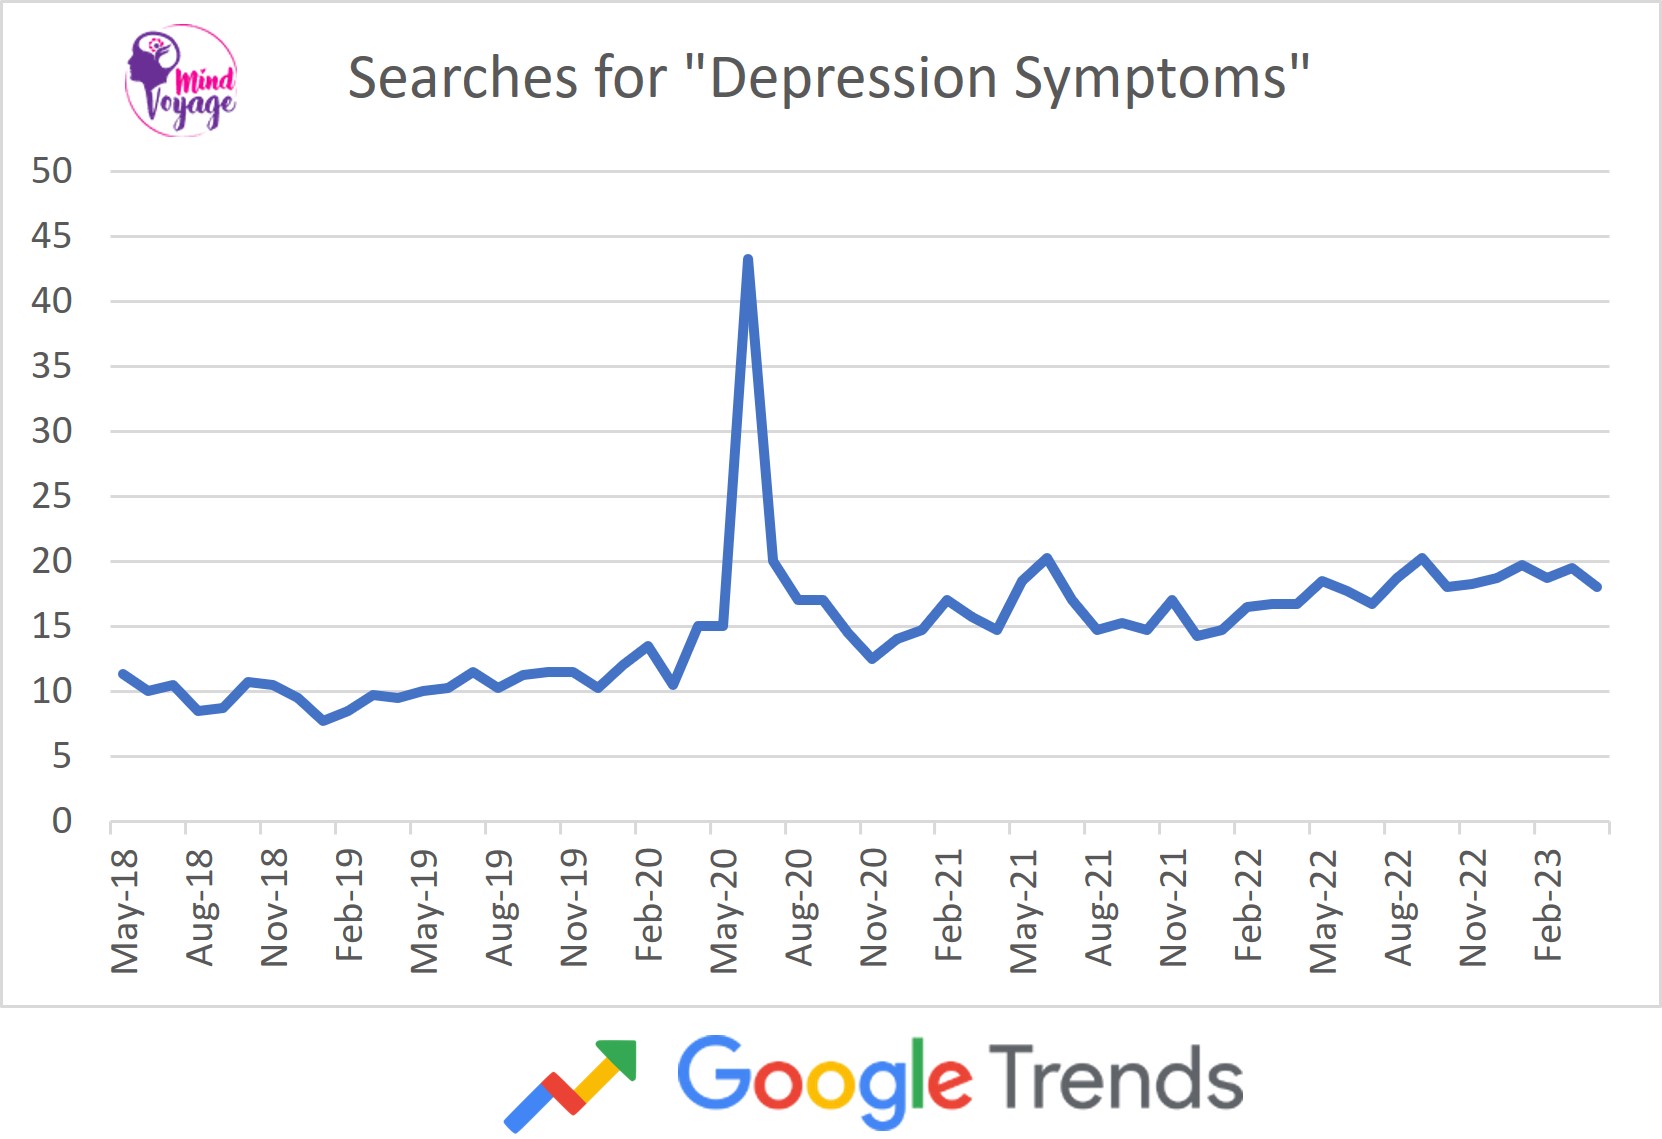 Depression trends in india according to google trends - Chart